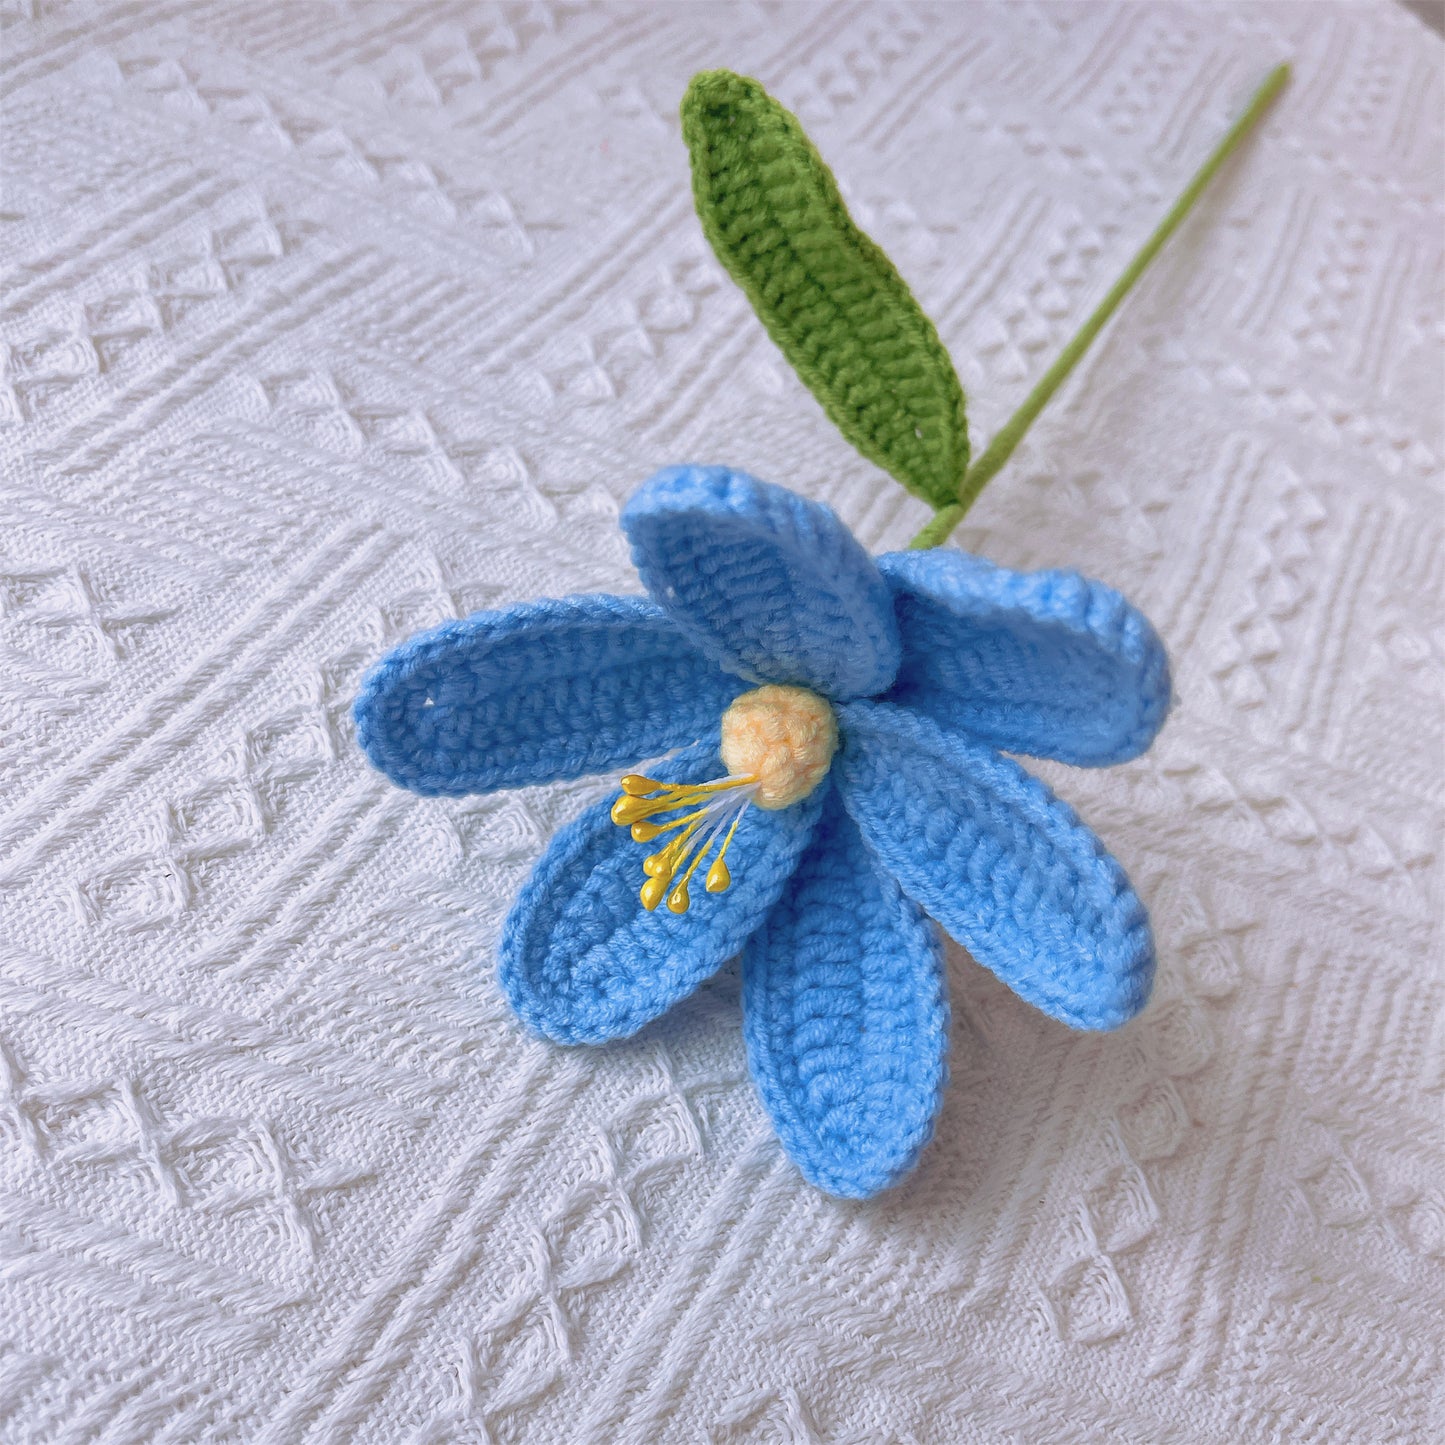 Handmade Crocheted Oceanic Serenity Bouquet - Blue Roses, Larkspur, Tulips & Daisies Bouquet